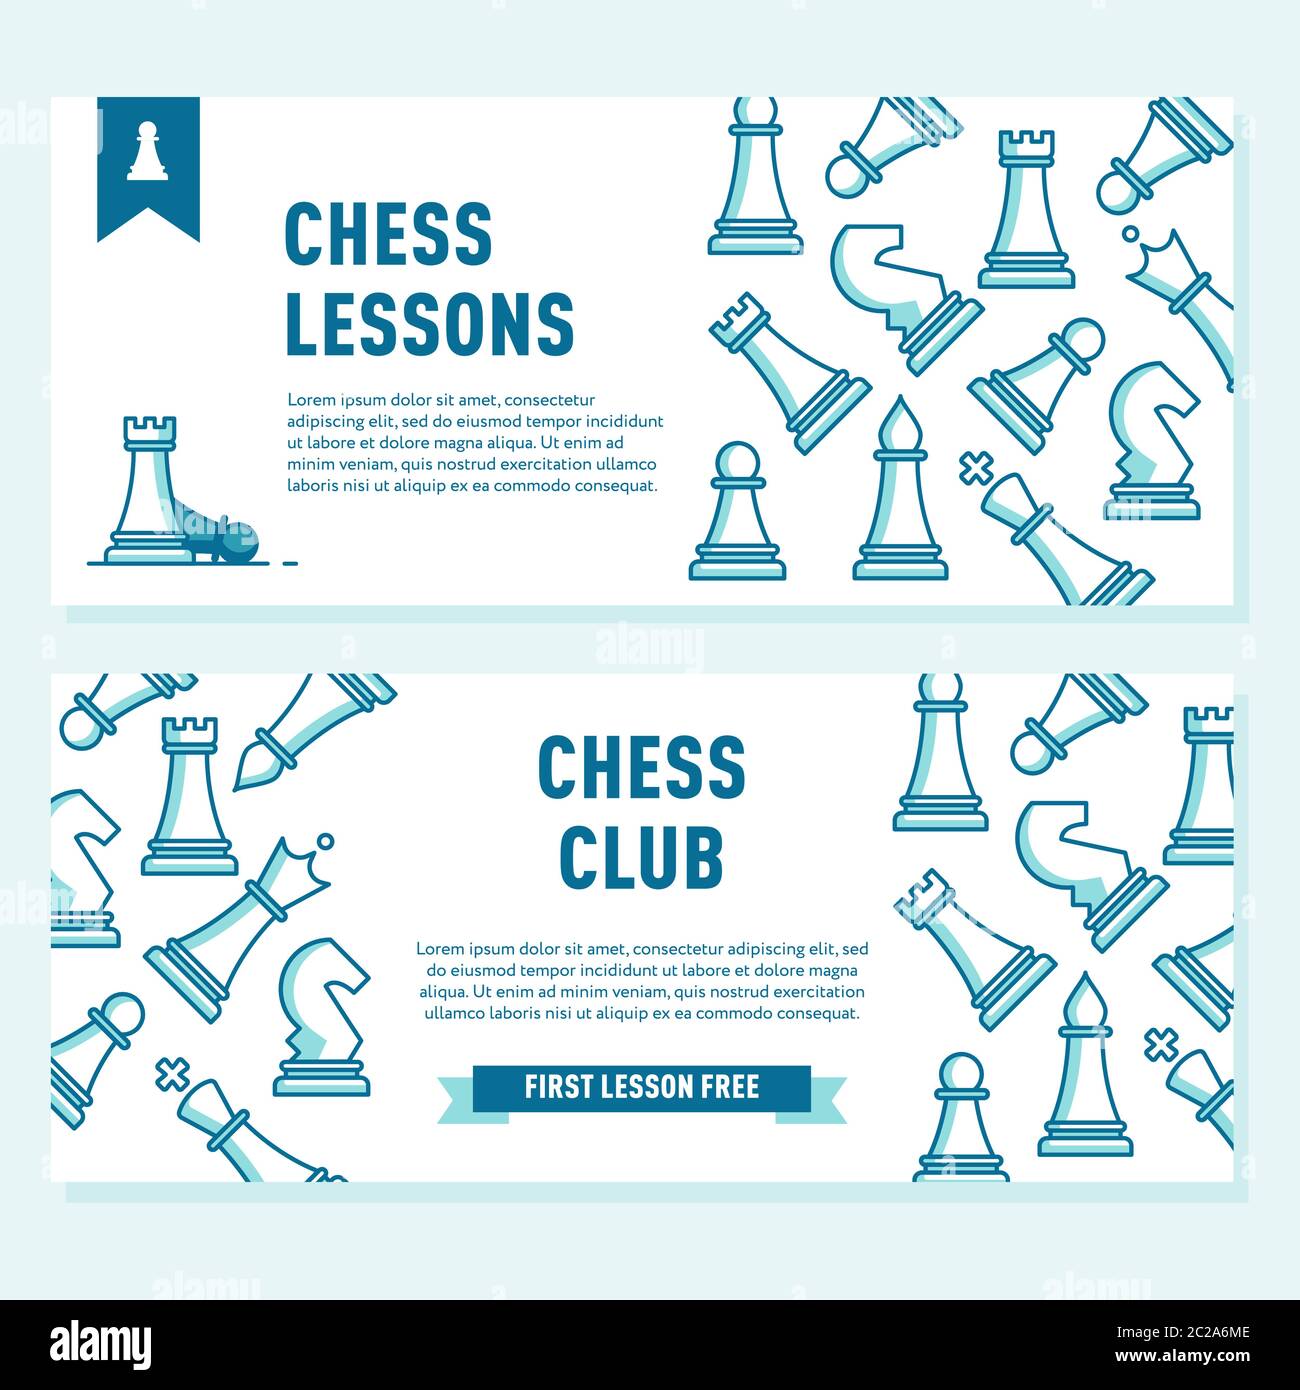 Chess Club Flyer Template Chess Lessons Concept Template For Chess Club Or Chess School Stock Vector Image Art Alamy